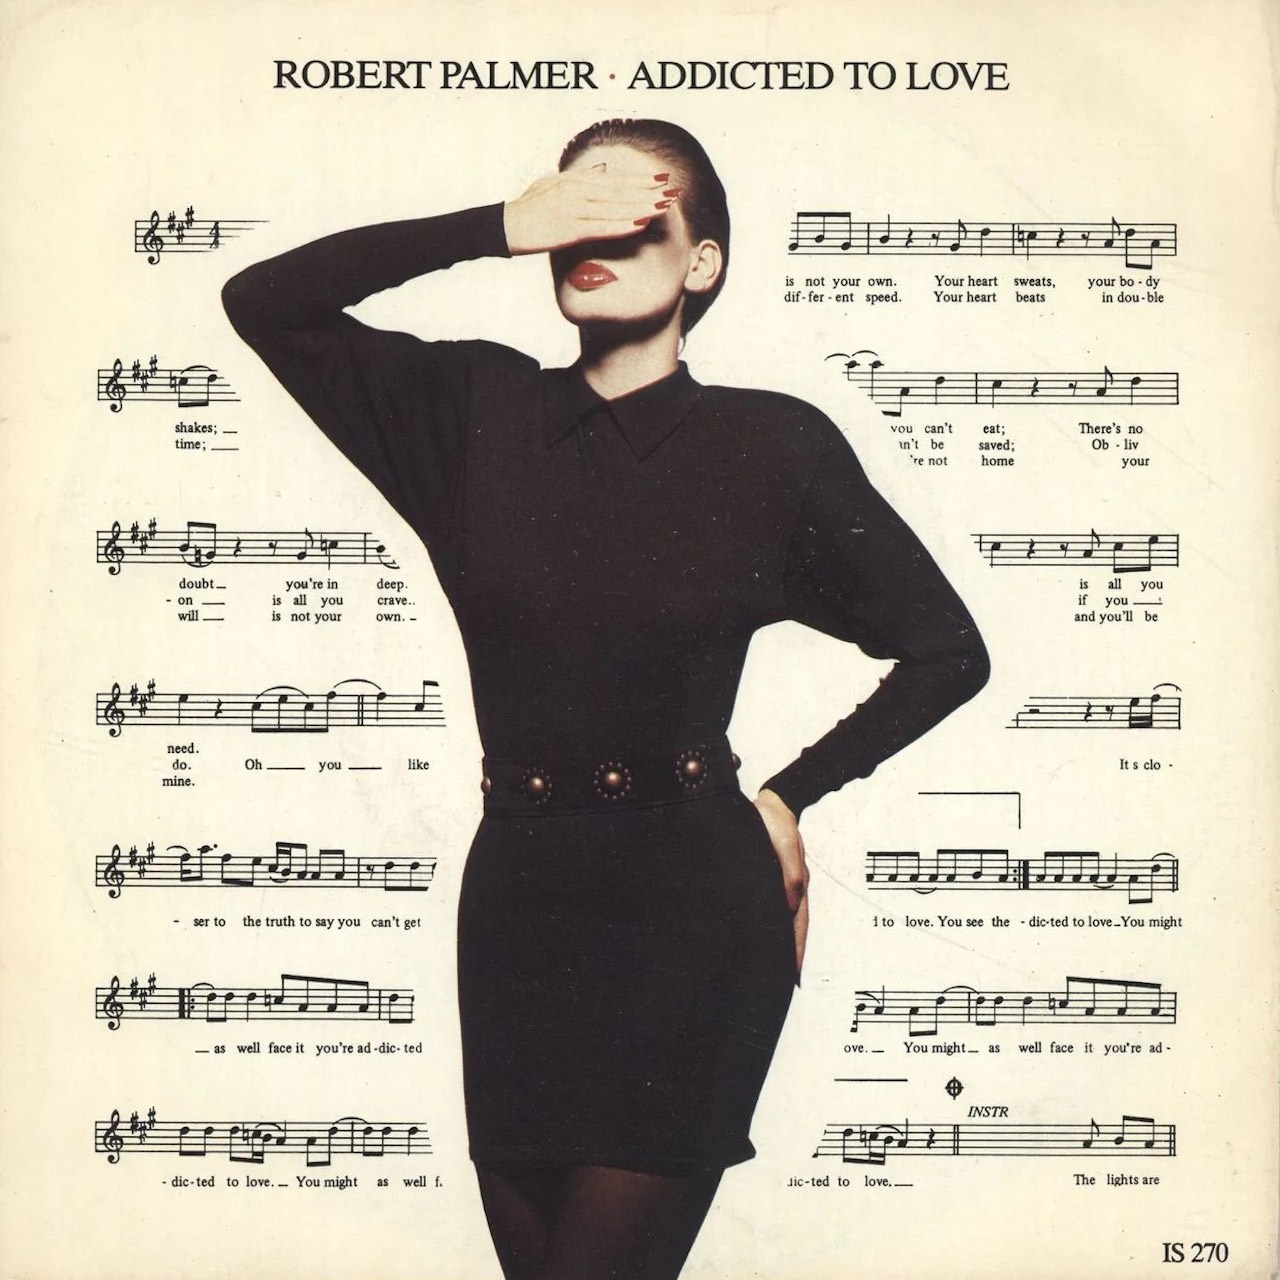 ‘Addicted To Love’: America Couldn’t Get Enough Of Robert Palmer